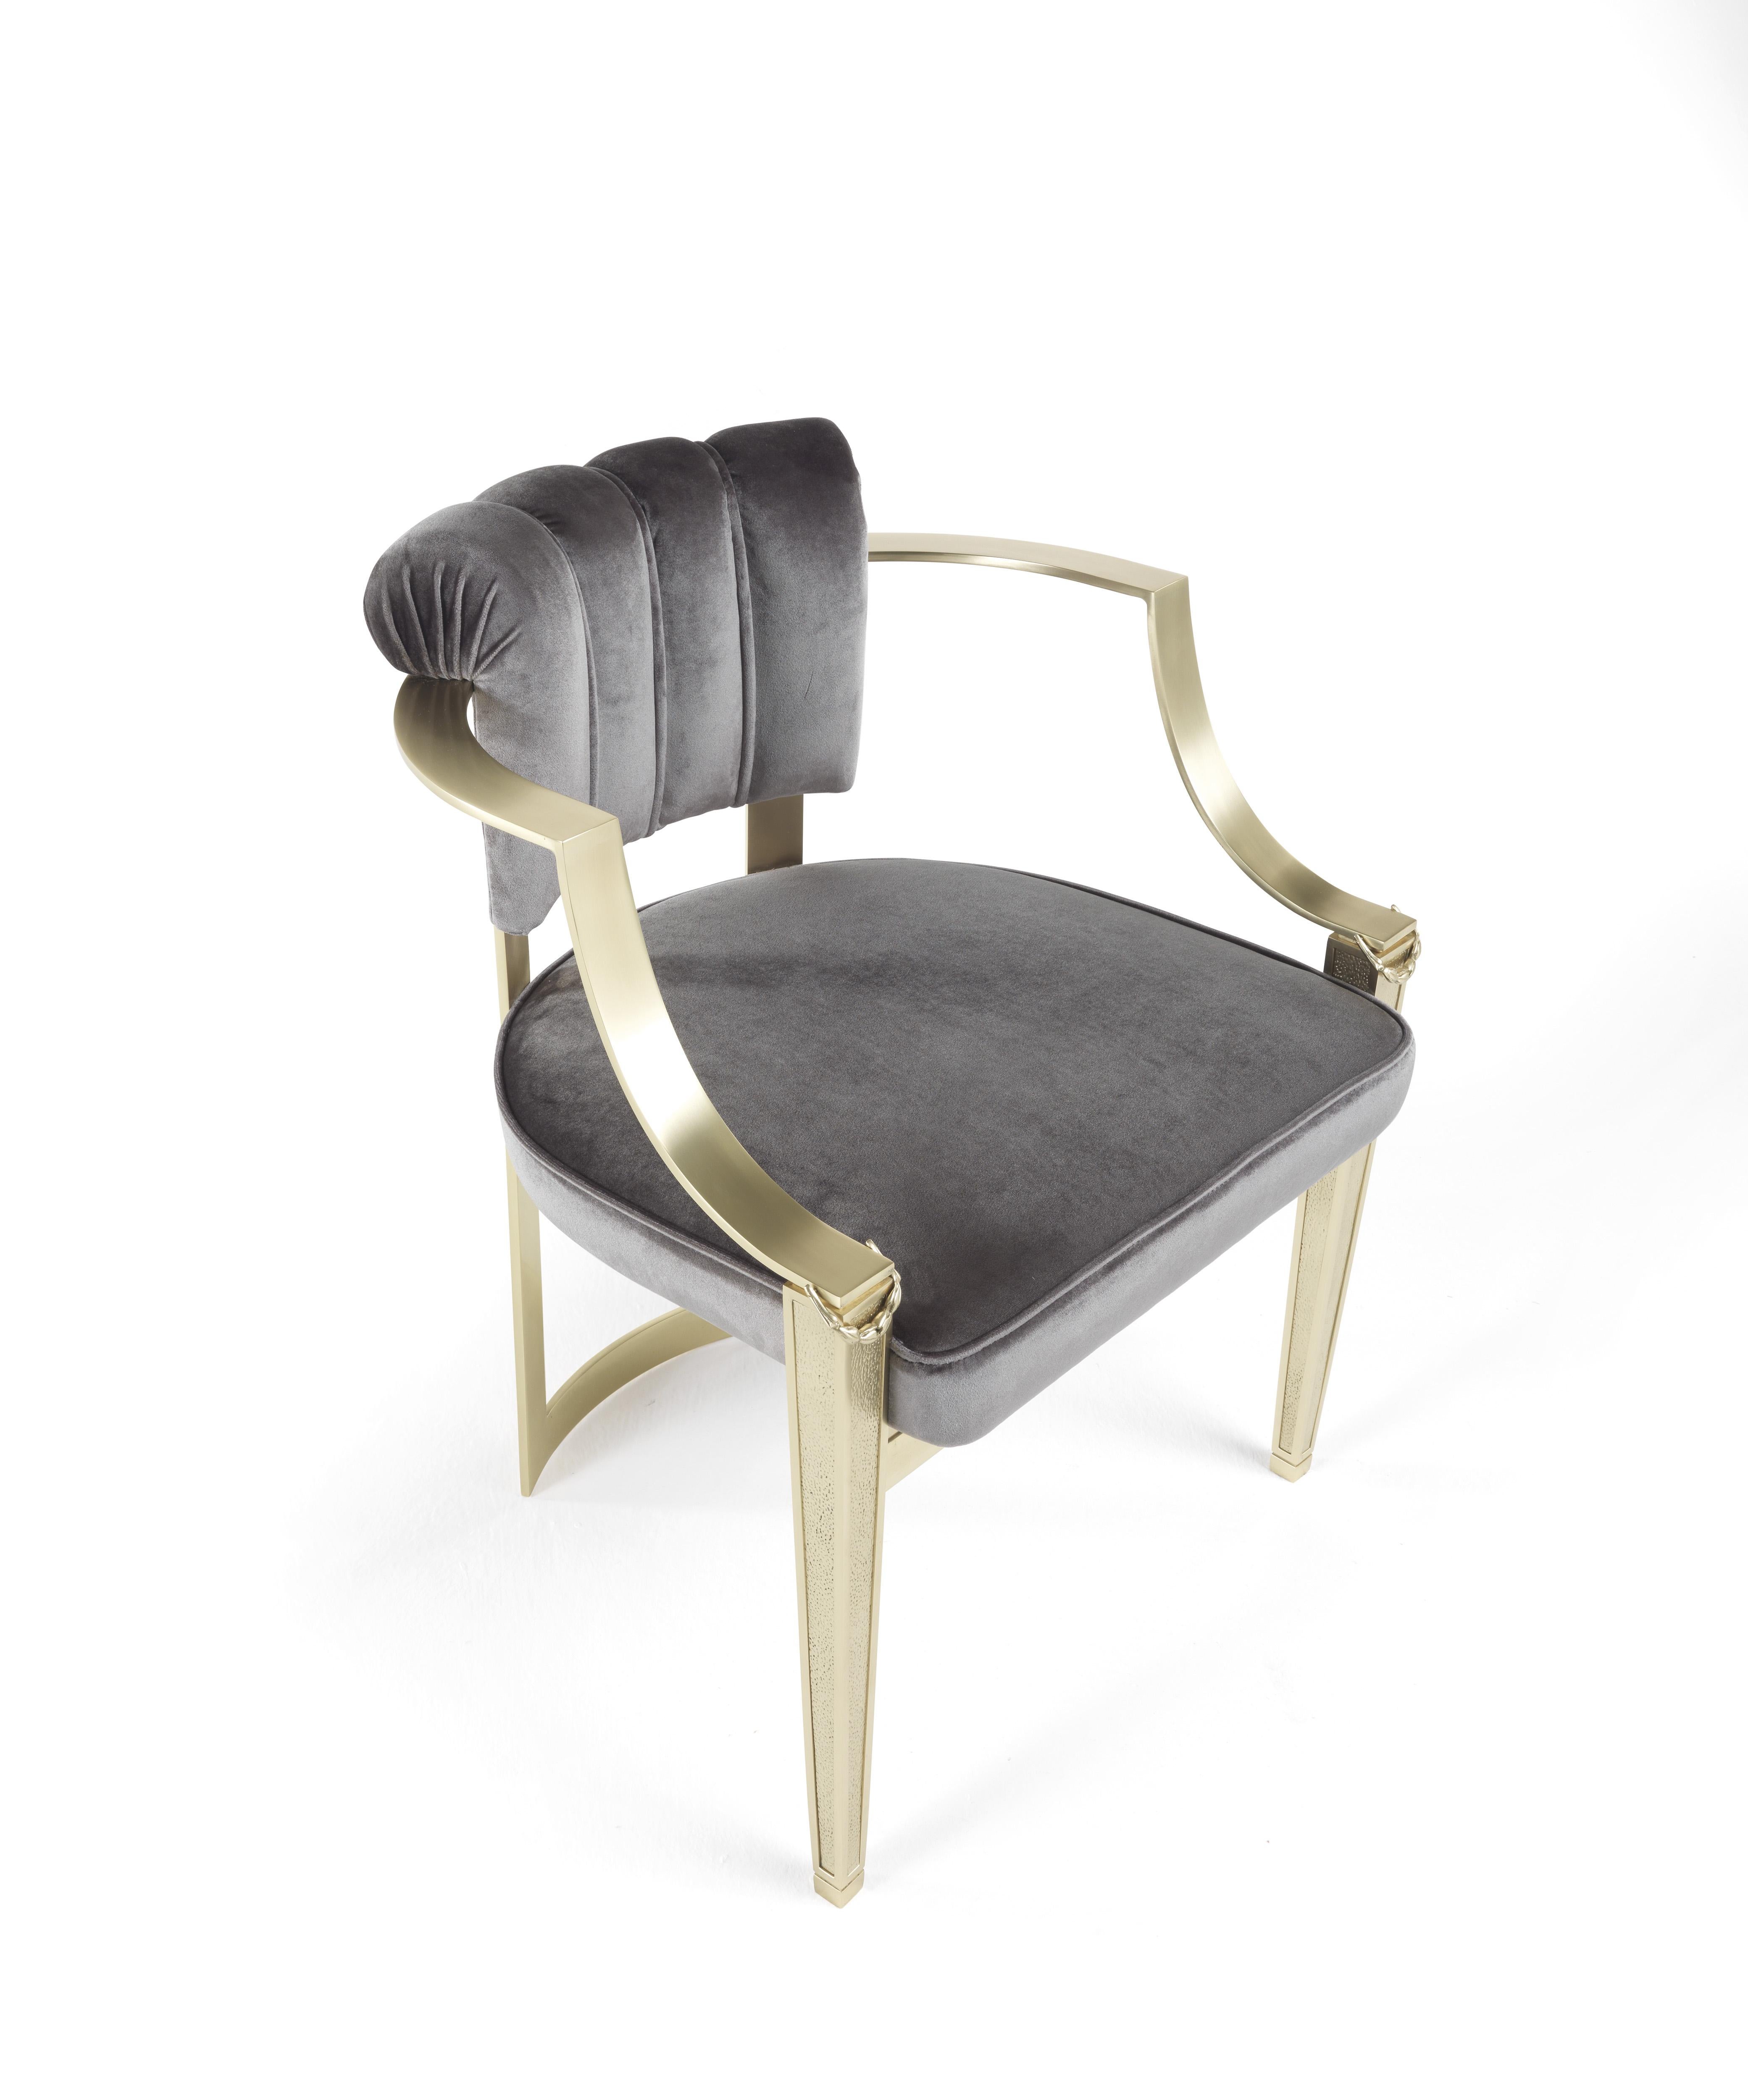 Halfway between chair and armchair, Fuji is a refined piece of furniture expressing a fresh and light-filled classic style. It features a shell-shaped backrest covered in silk satin of the collection and antiqued gold finished legs.
Fuji chair with